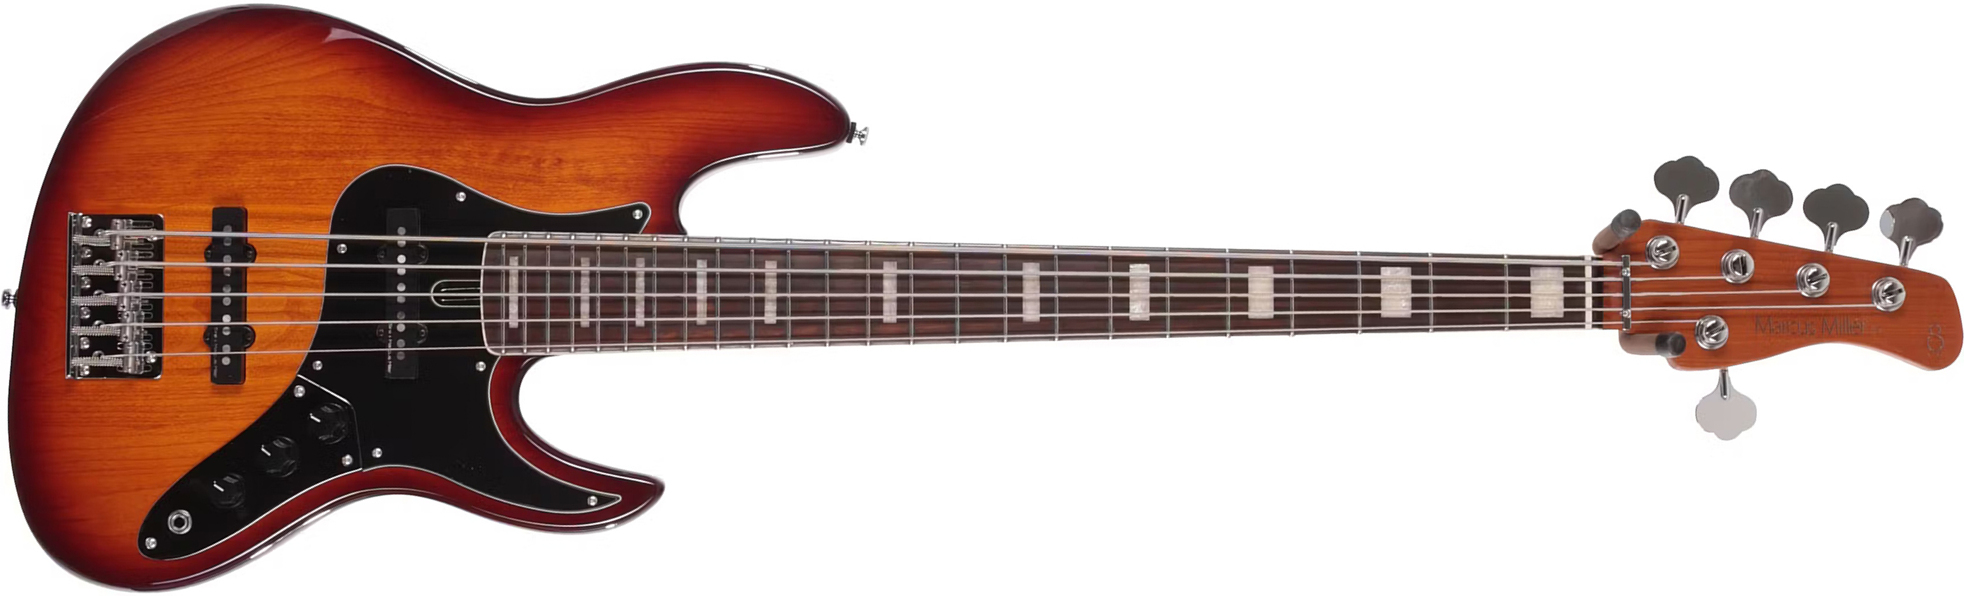 Marcus Miller V5 24 Fret 5st 5c Rw - Tobacco Sunburst - Solid body electric bass - Main picture